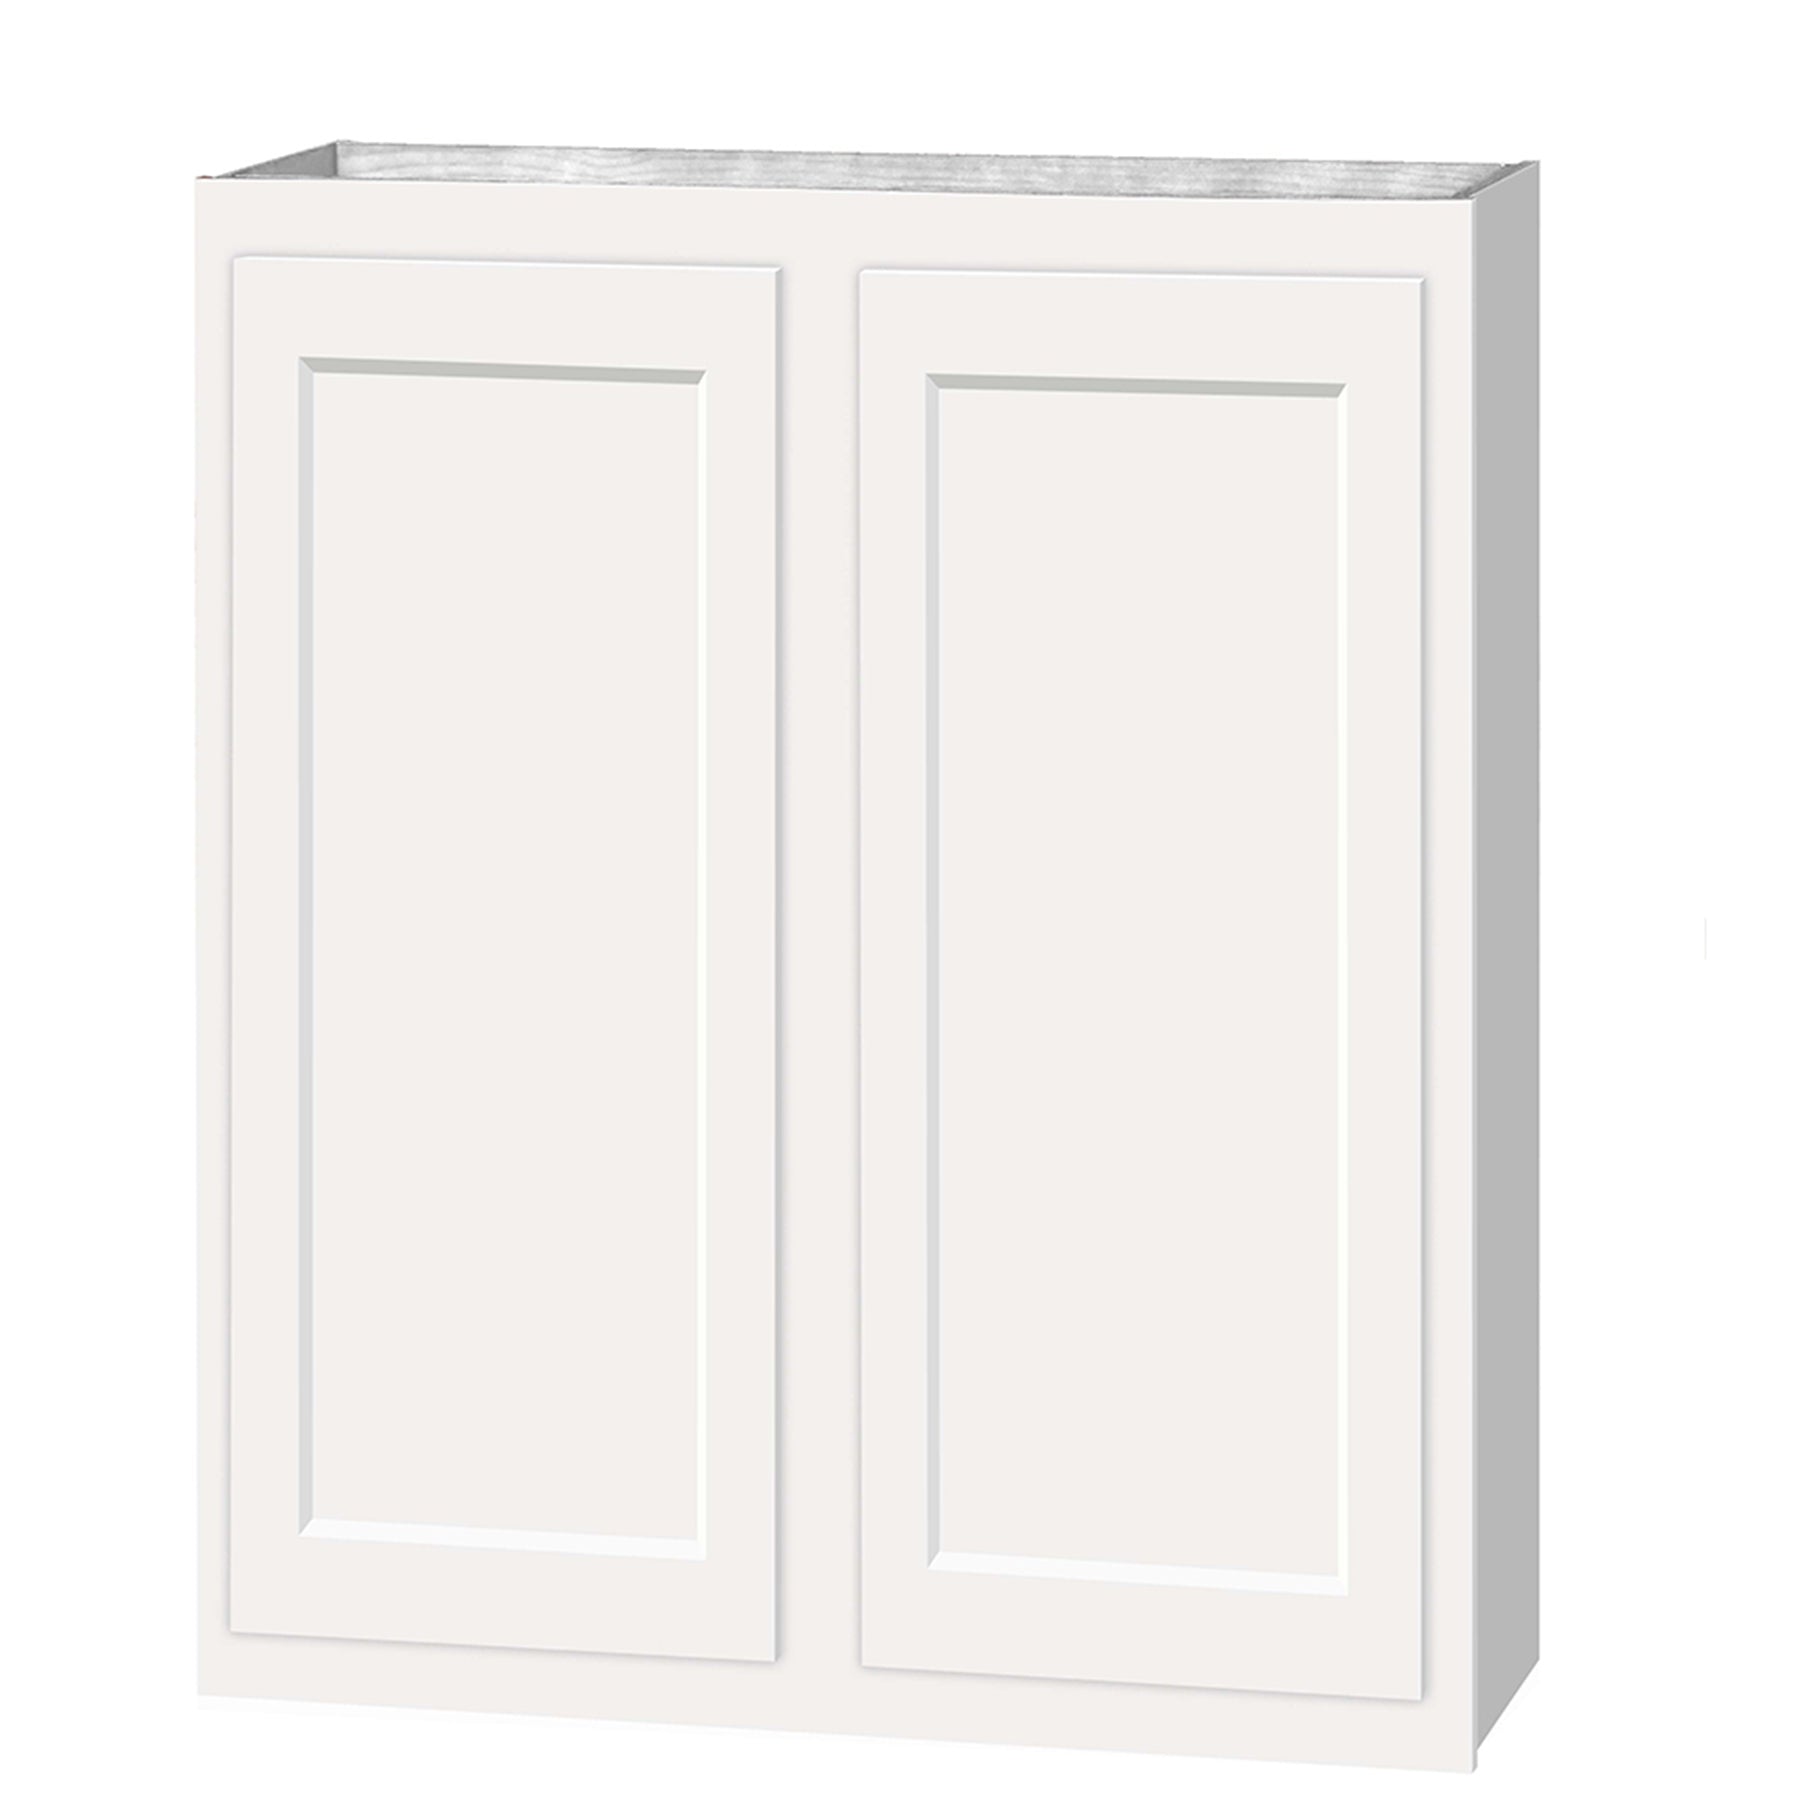 36 inch Wall Cabinets - Dwhite Shaker - 33 Inch W x 36 Inch H x 12 Inch D